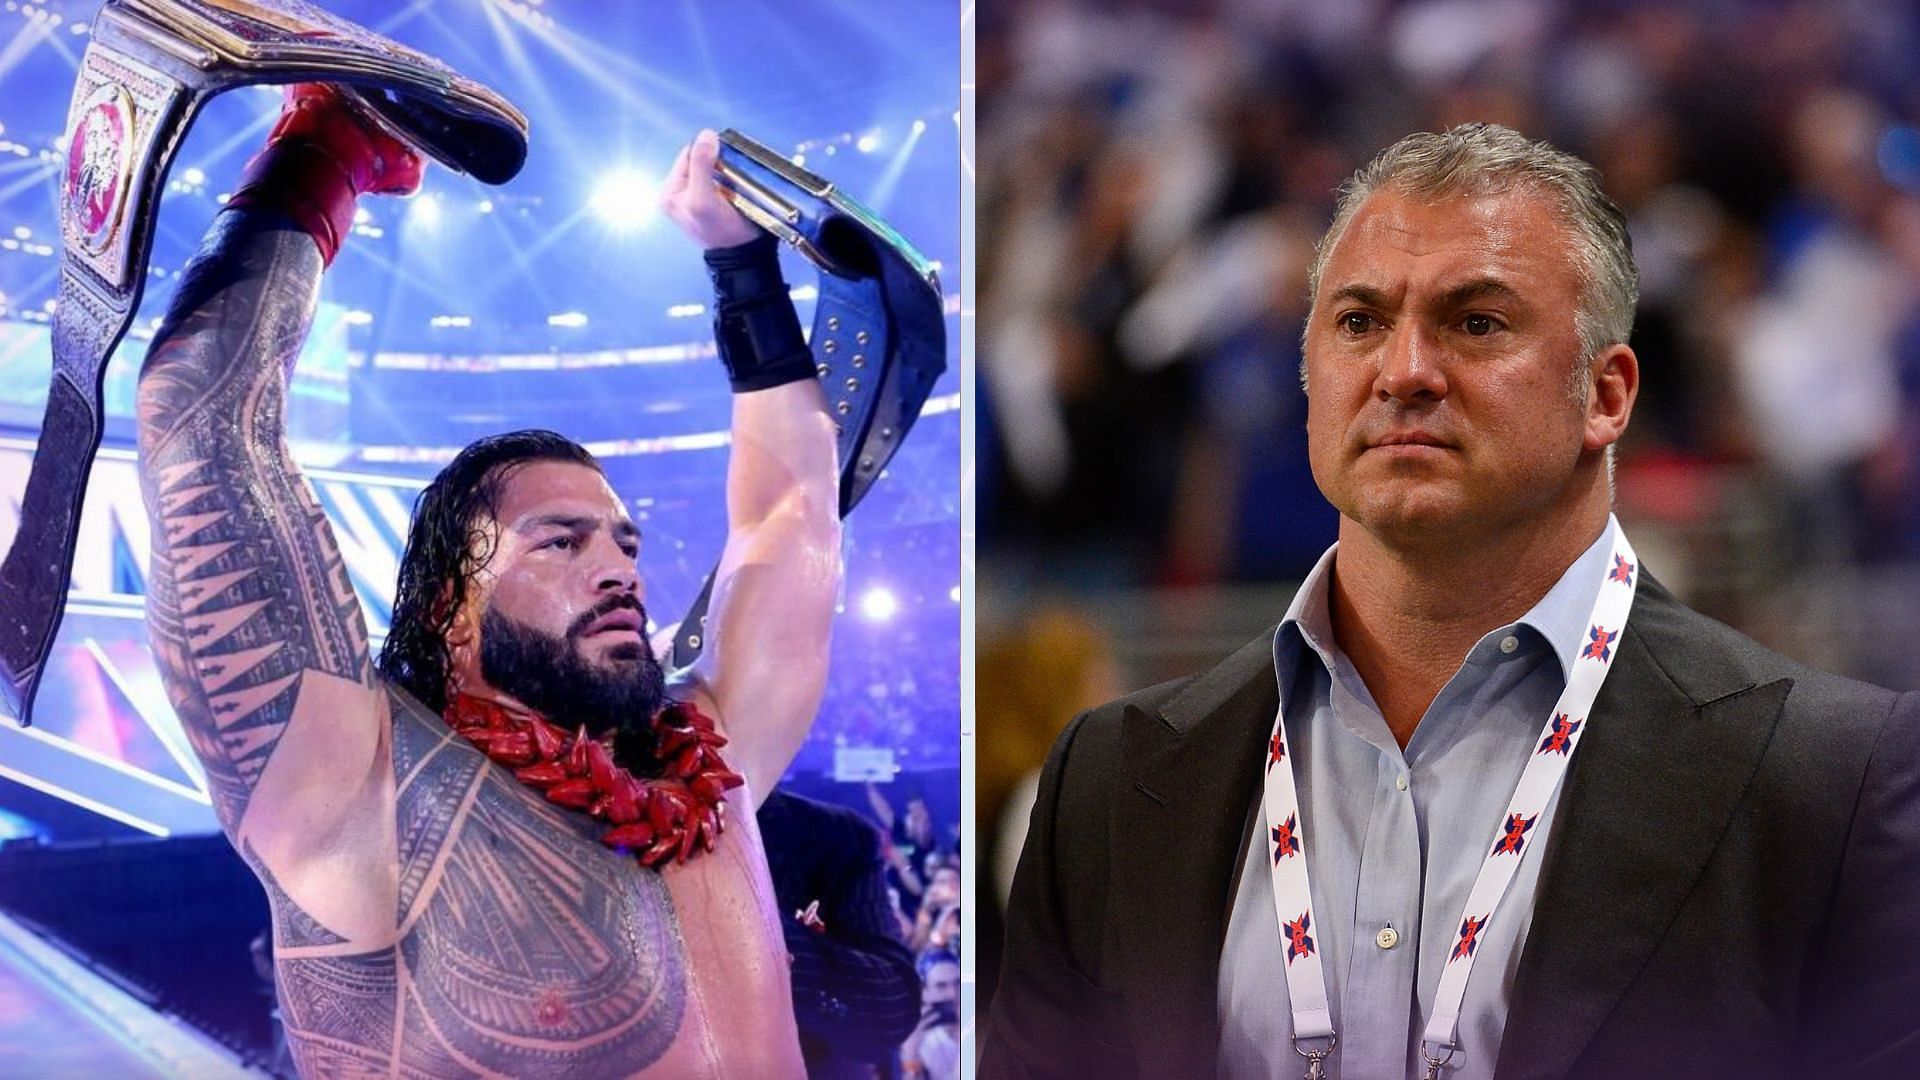 Roman Reigns and Shane McMahon were involved in a feud in 2019